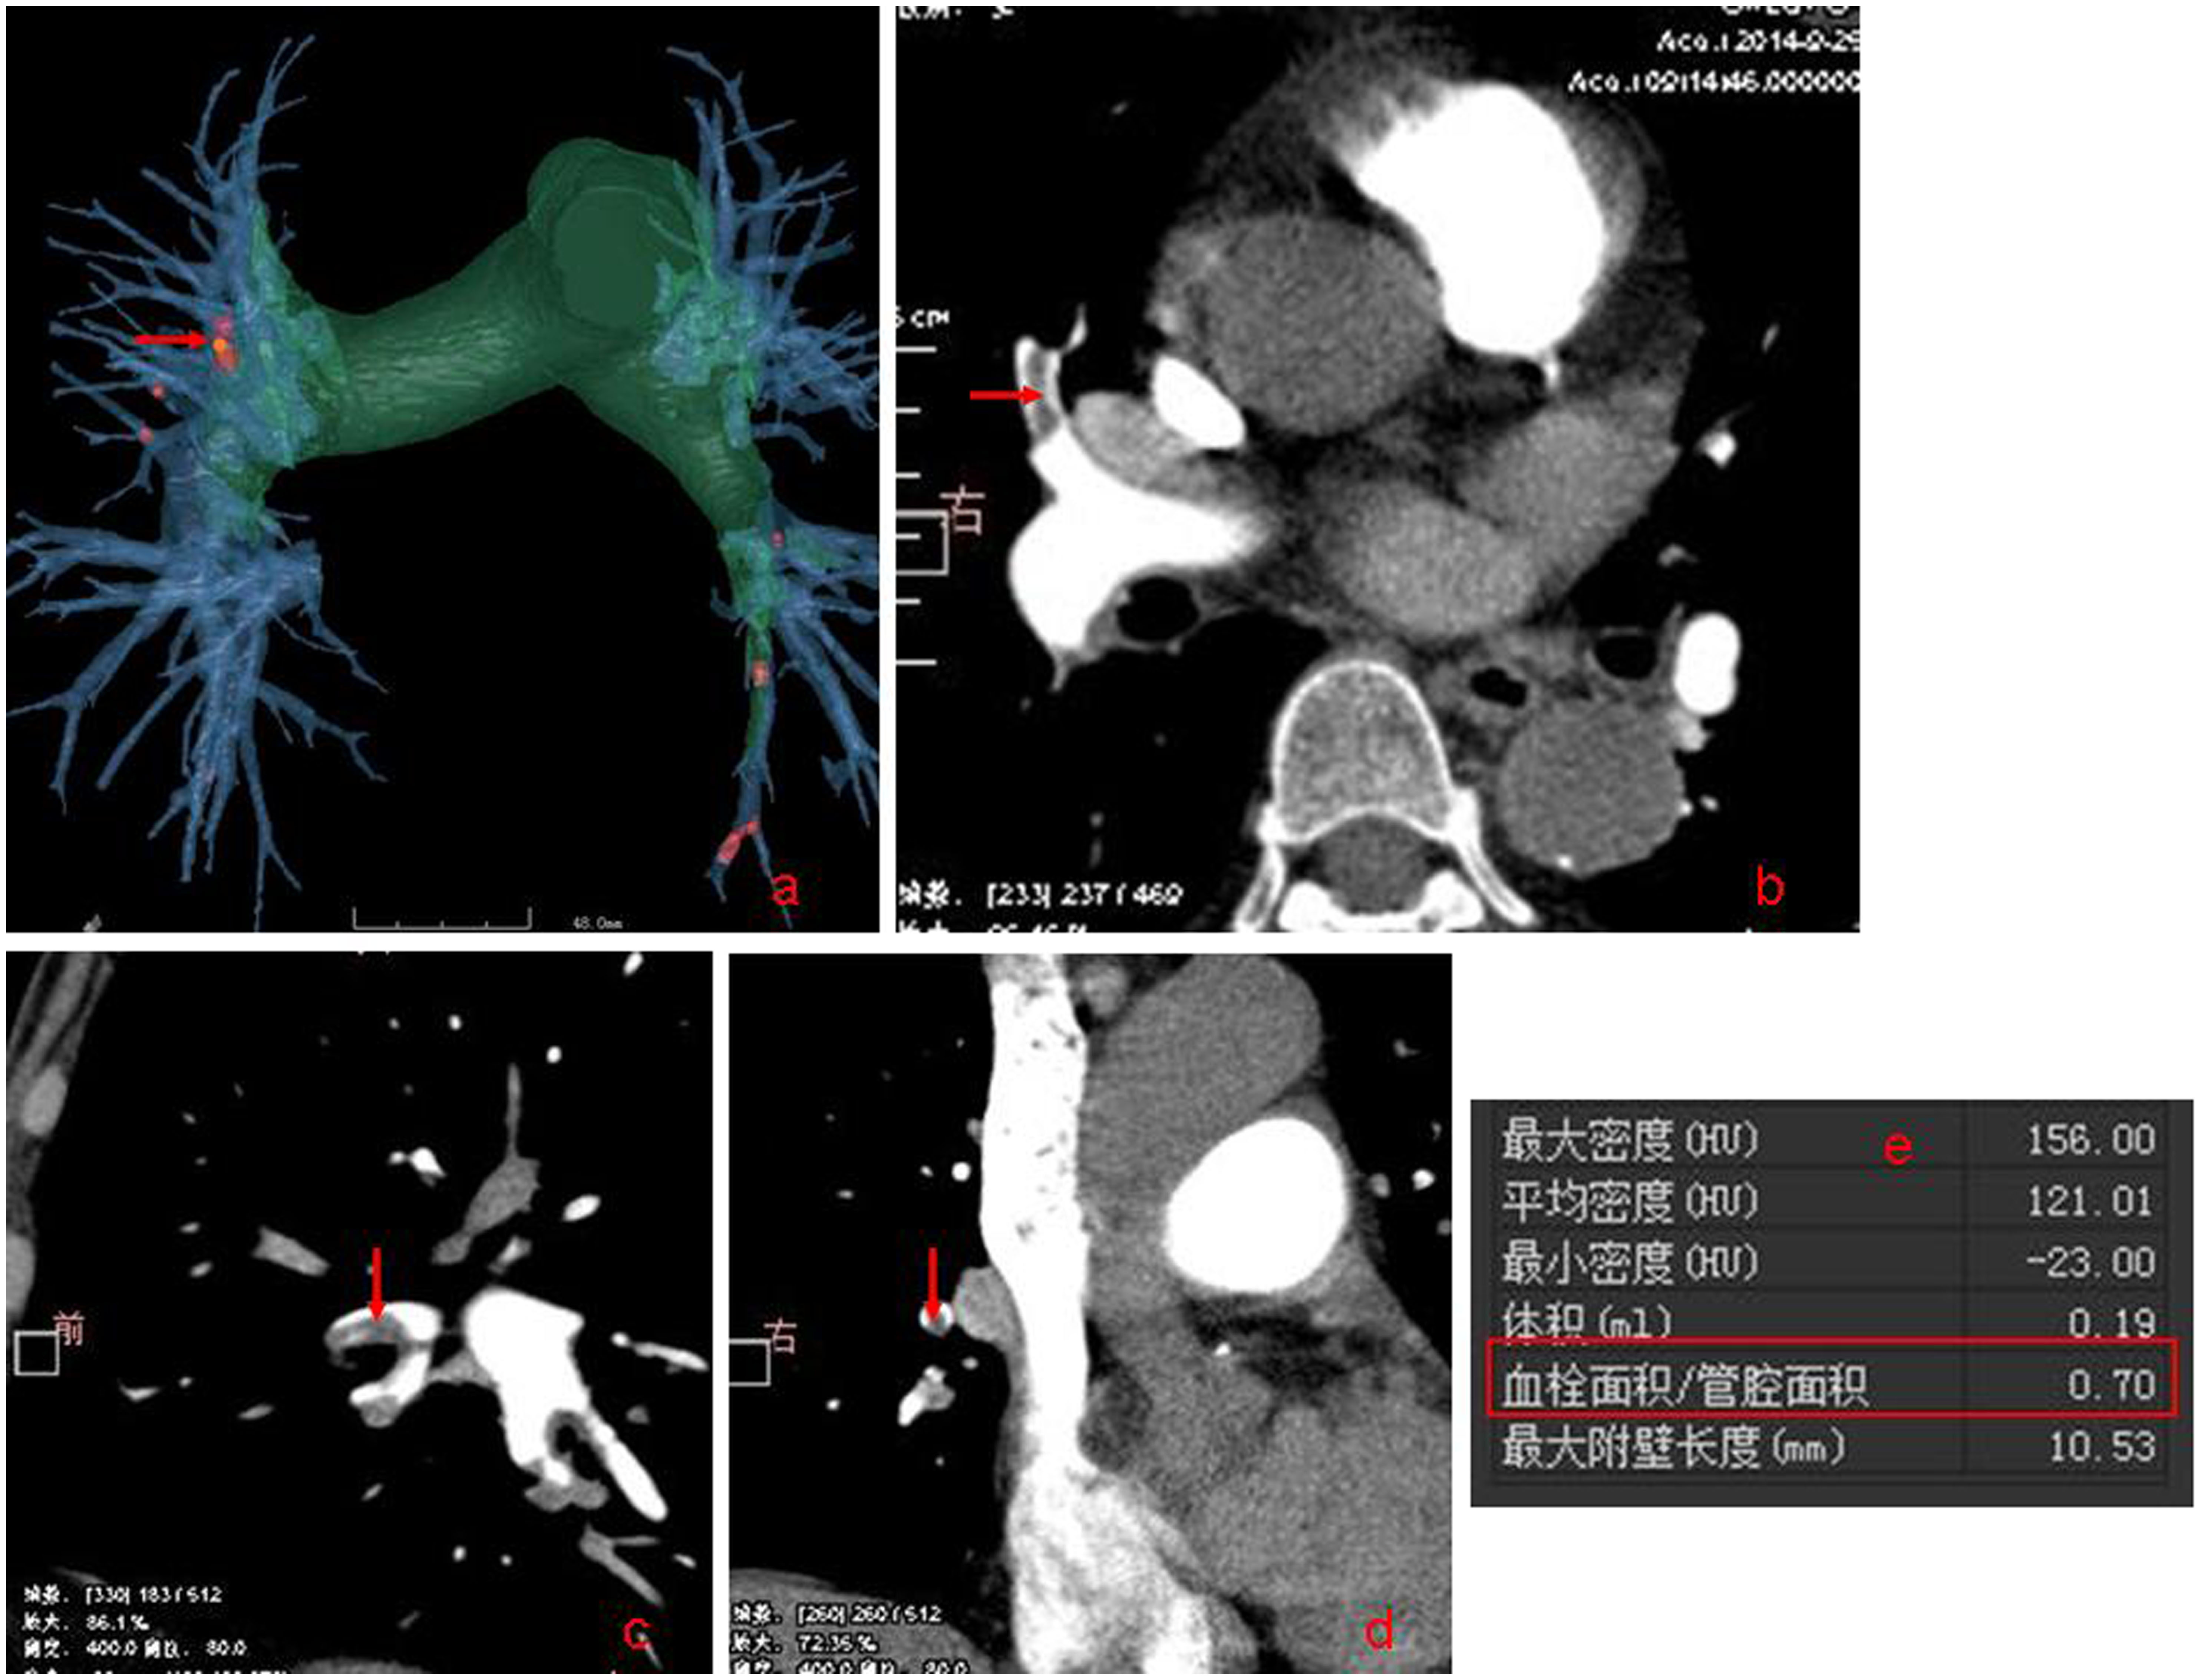 Fully automatic identified pulmonary embolism and automatic calculated embolism area/ lumen area (red box).